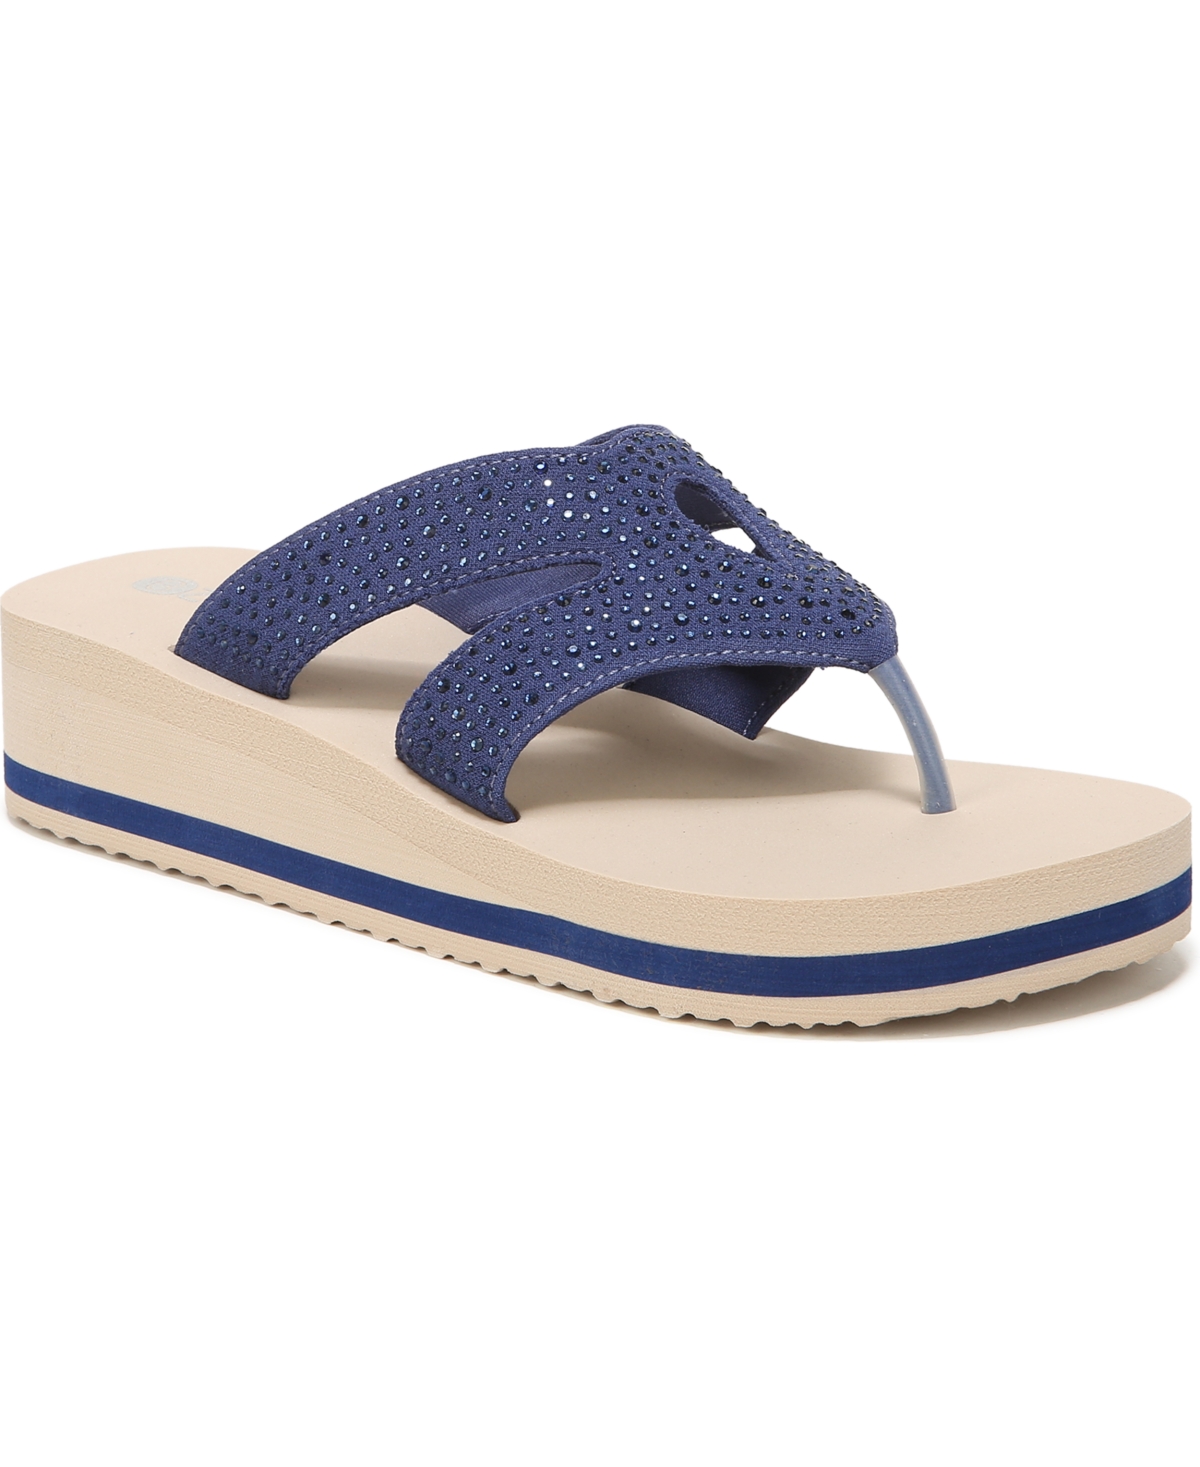 BZees Rio Washable Thong Wedge Sandals Women's Shoes